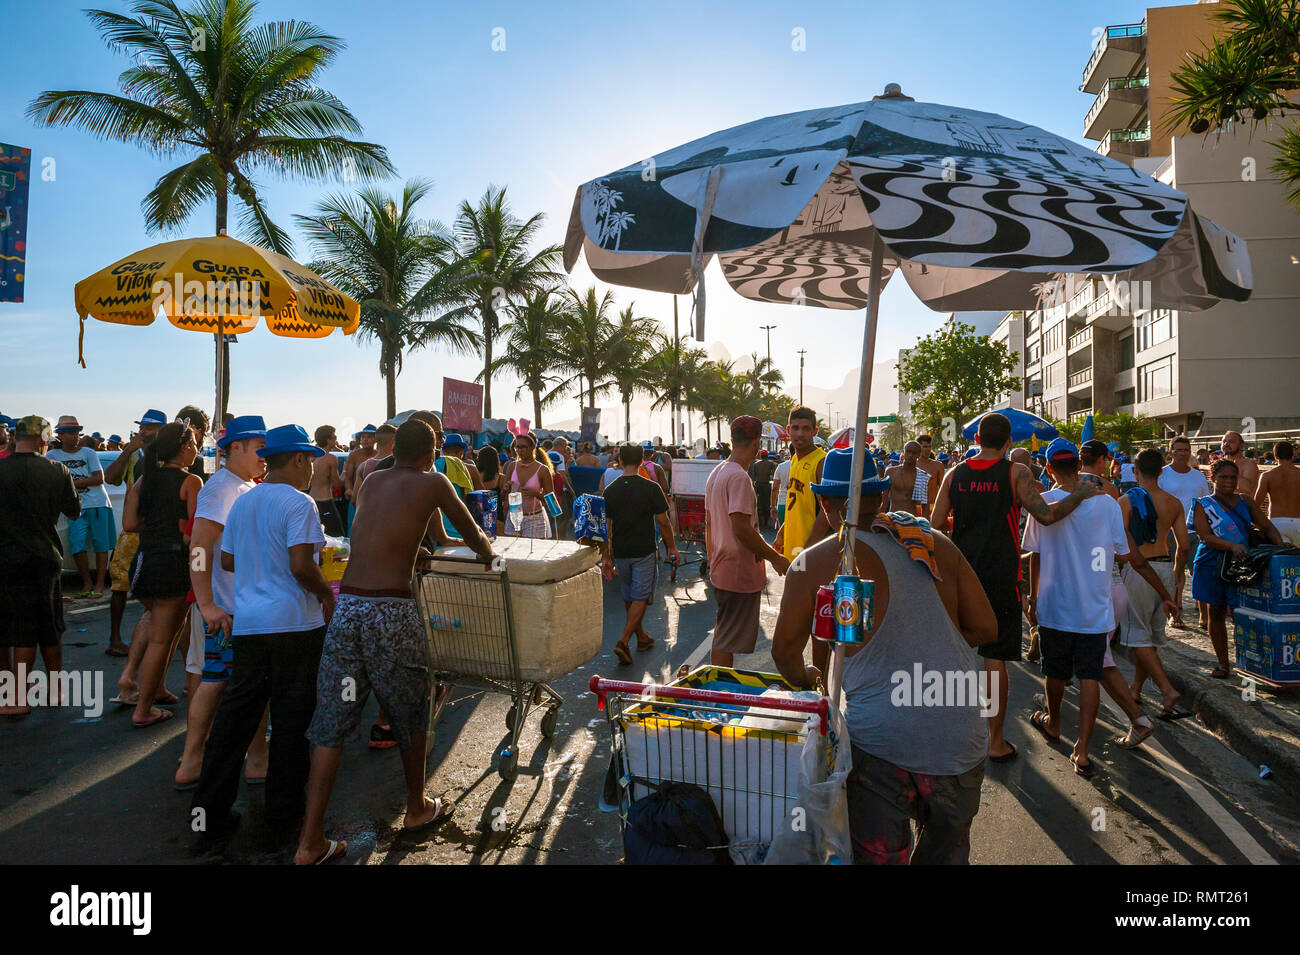 RIO DE JANEIRO - FEBRUARY 28, 2017: Unlicensed Brazilian street vendors compete to serve drinks to crowds celebrating at an afternoon Carnival party. Stock Photo